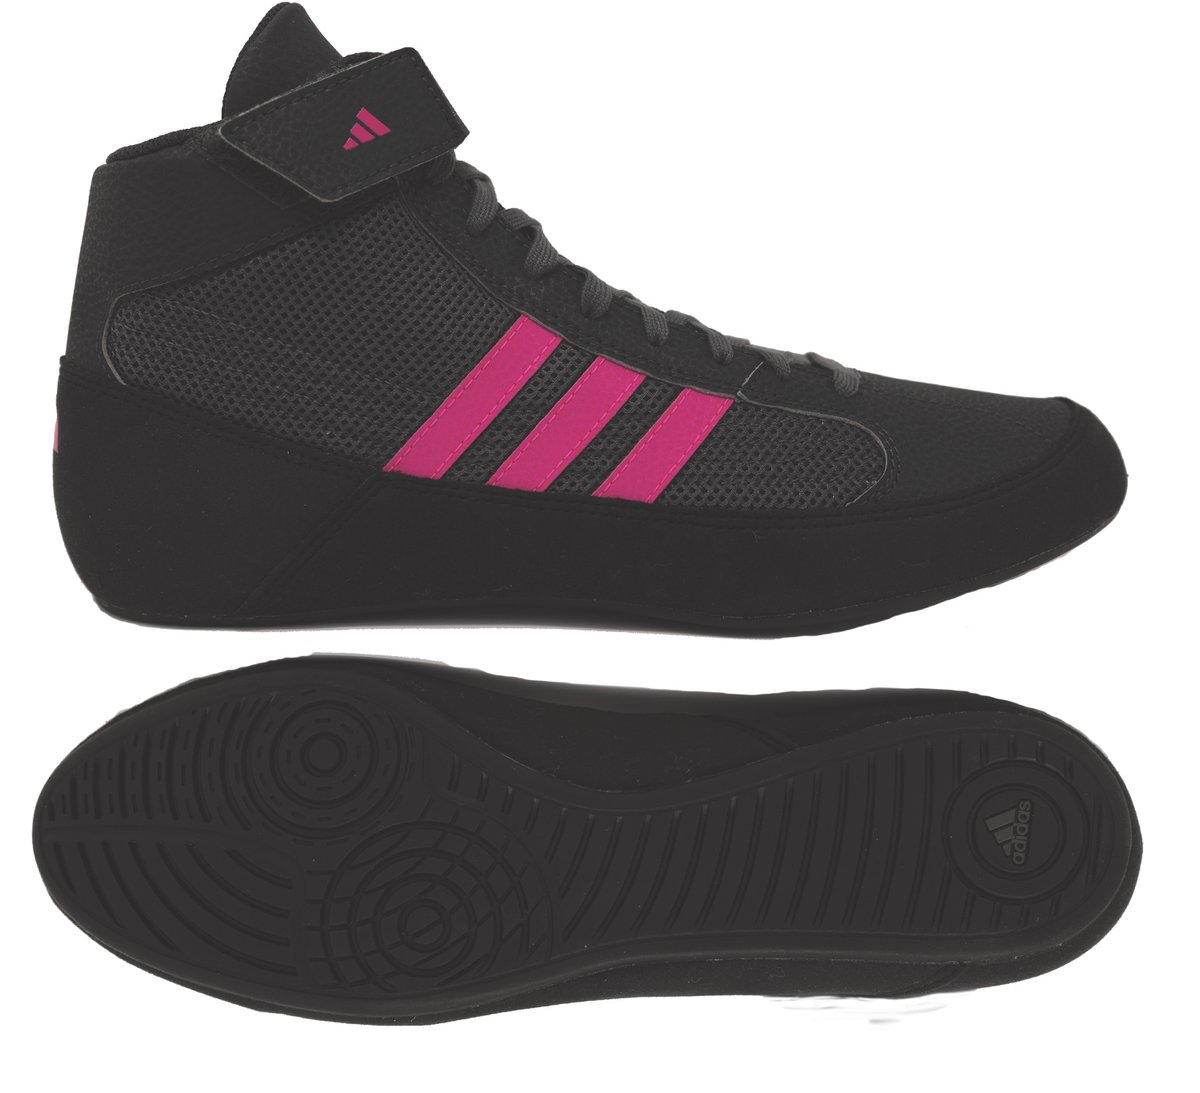 NEW!! Adidas HVC 2 Wrestling Shoes, color: Black/Charcoal/Pink